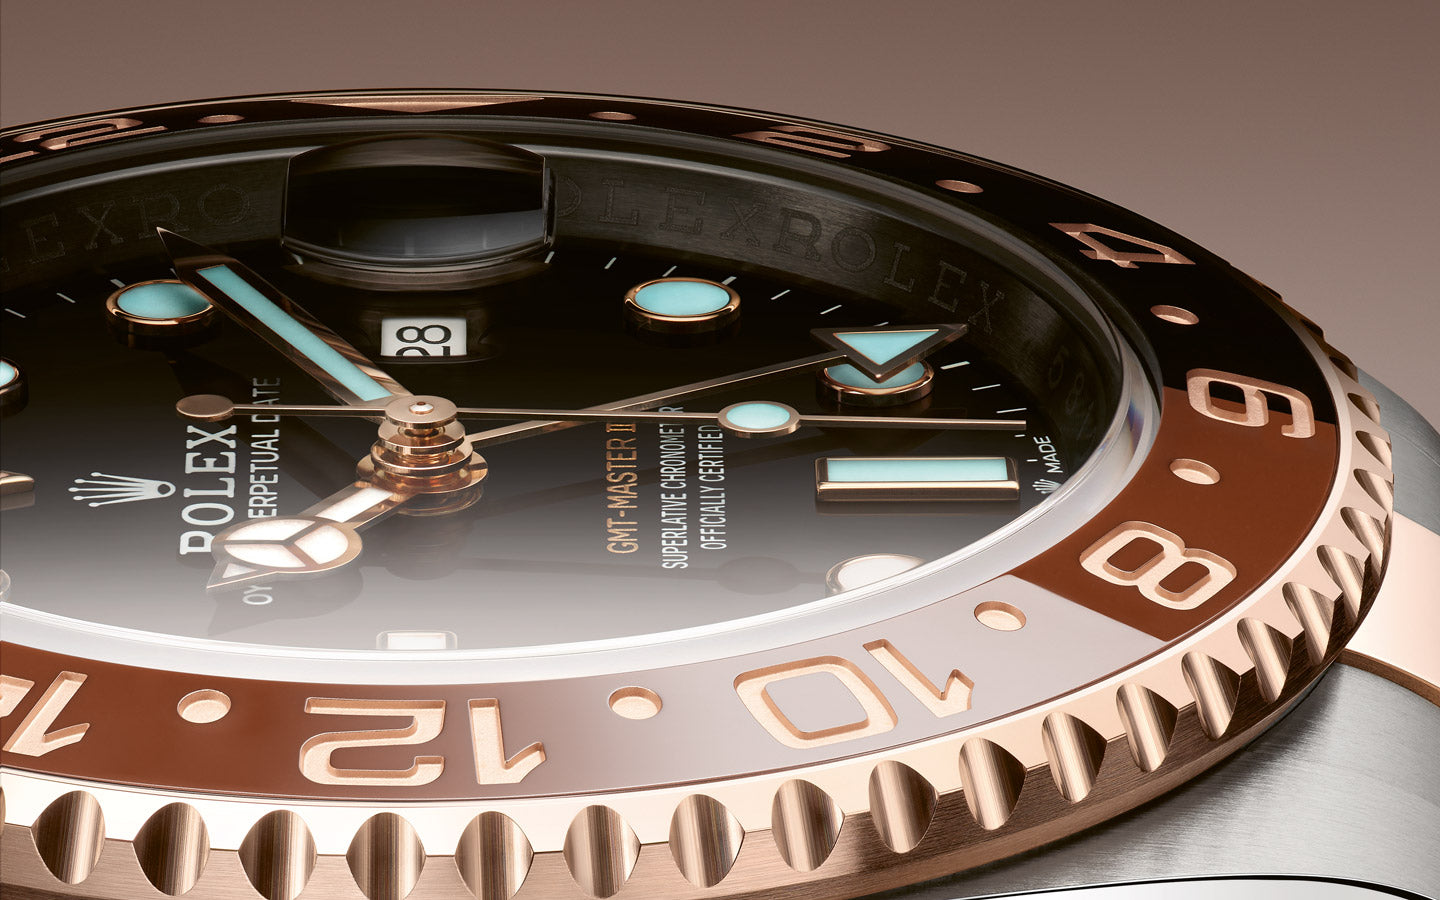 Rolex Oyster Perpetual GMT-Master II Bezel and Watch Face Detail at Fink's Jewelers